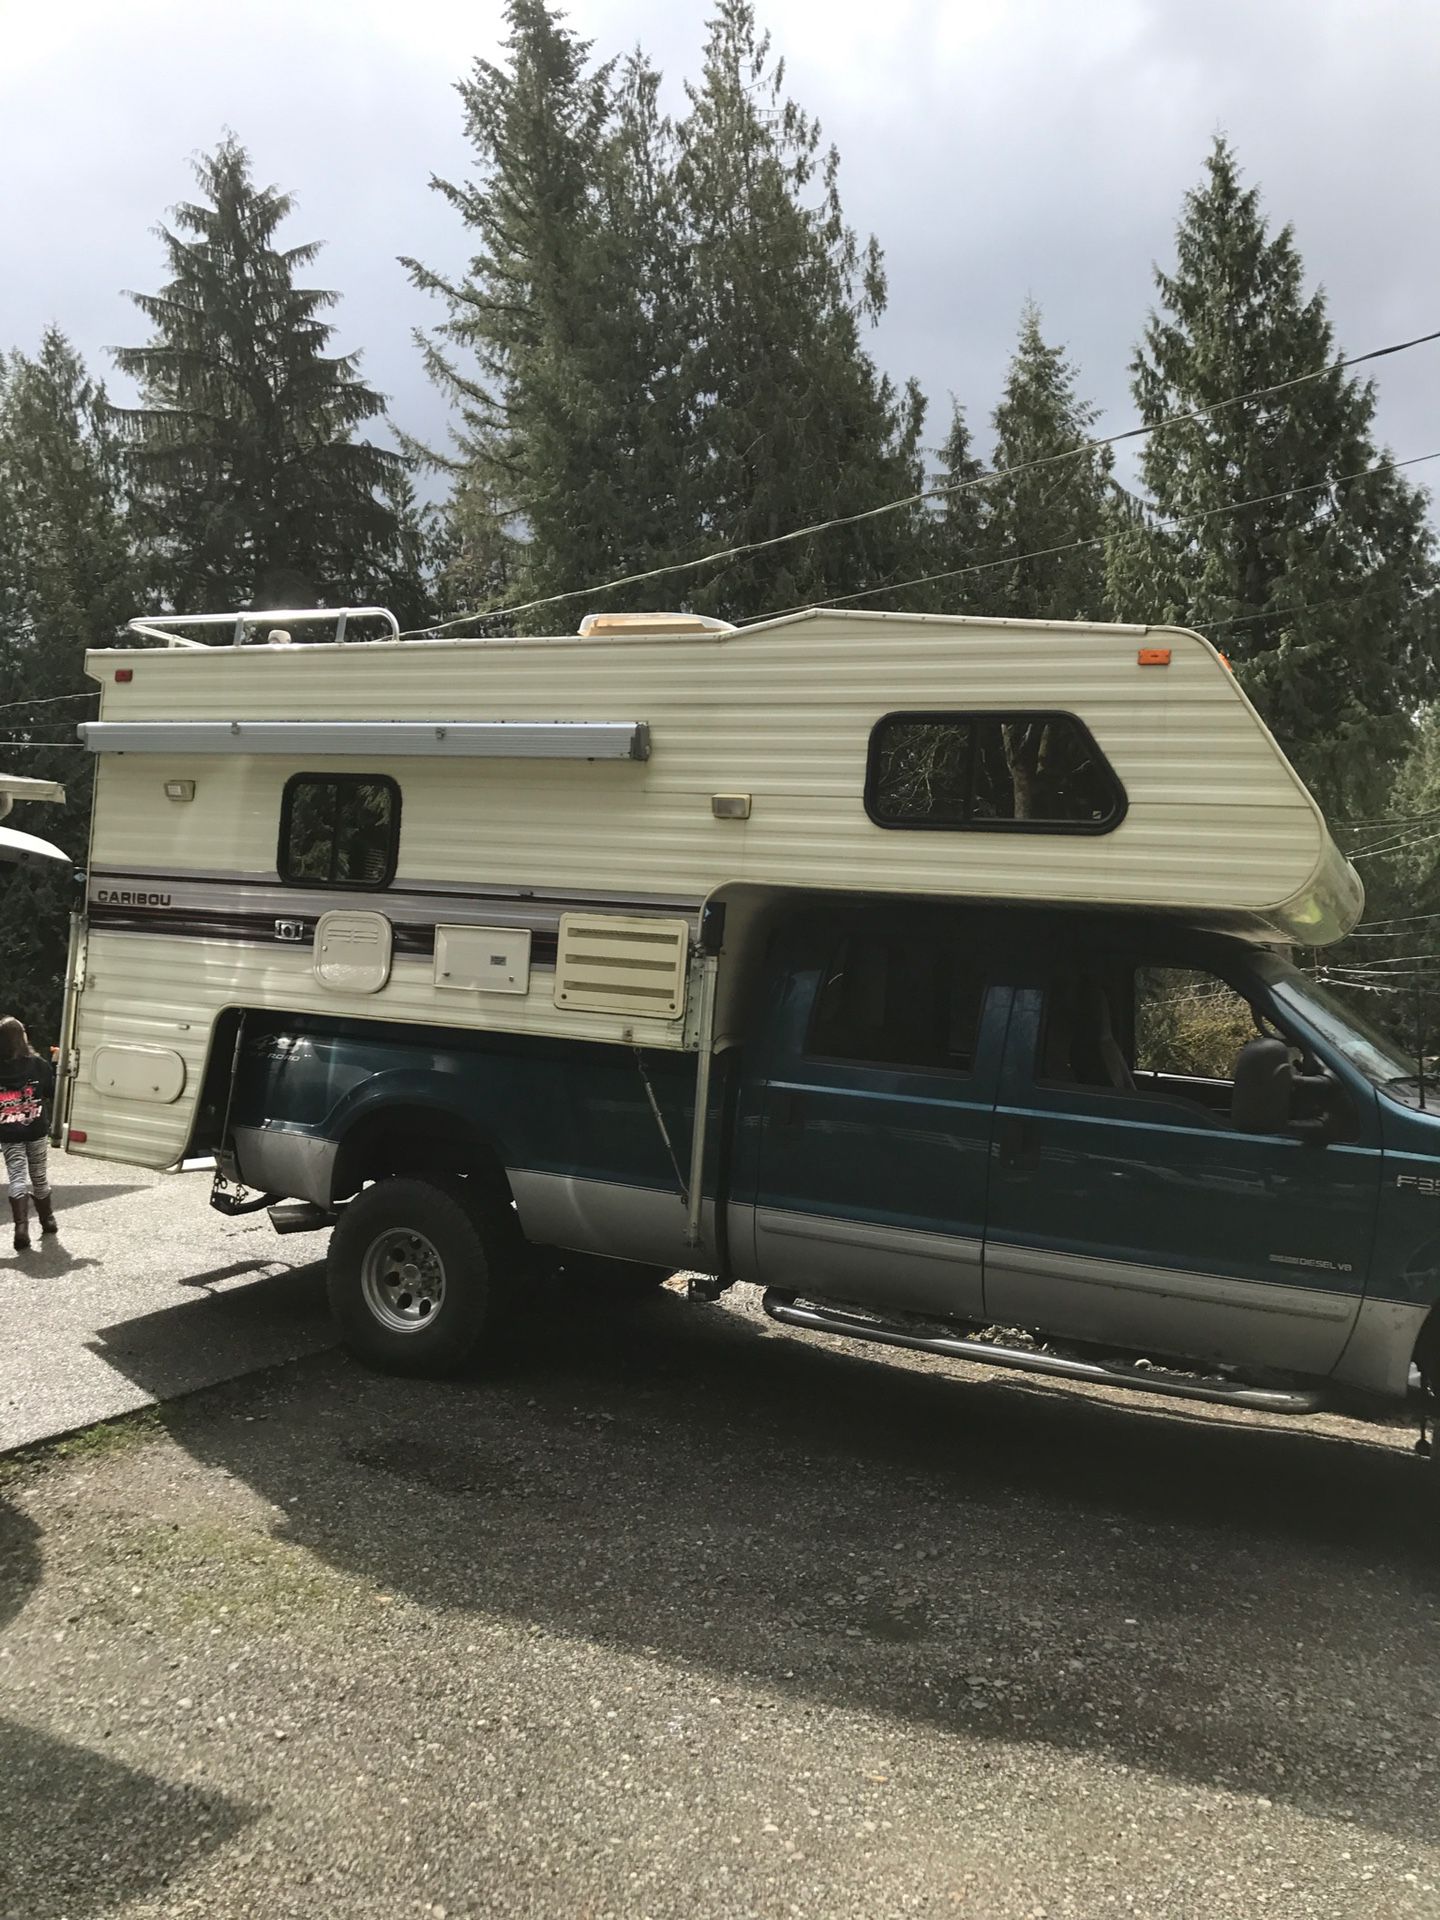 1993 Fleetwood Caribou 10gx in bed camper